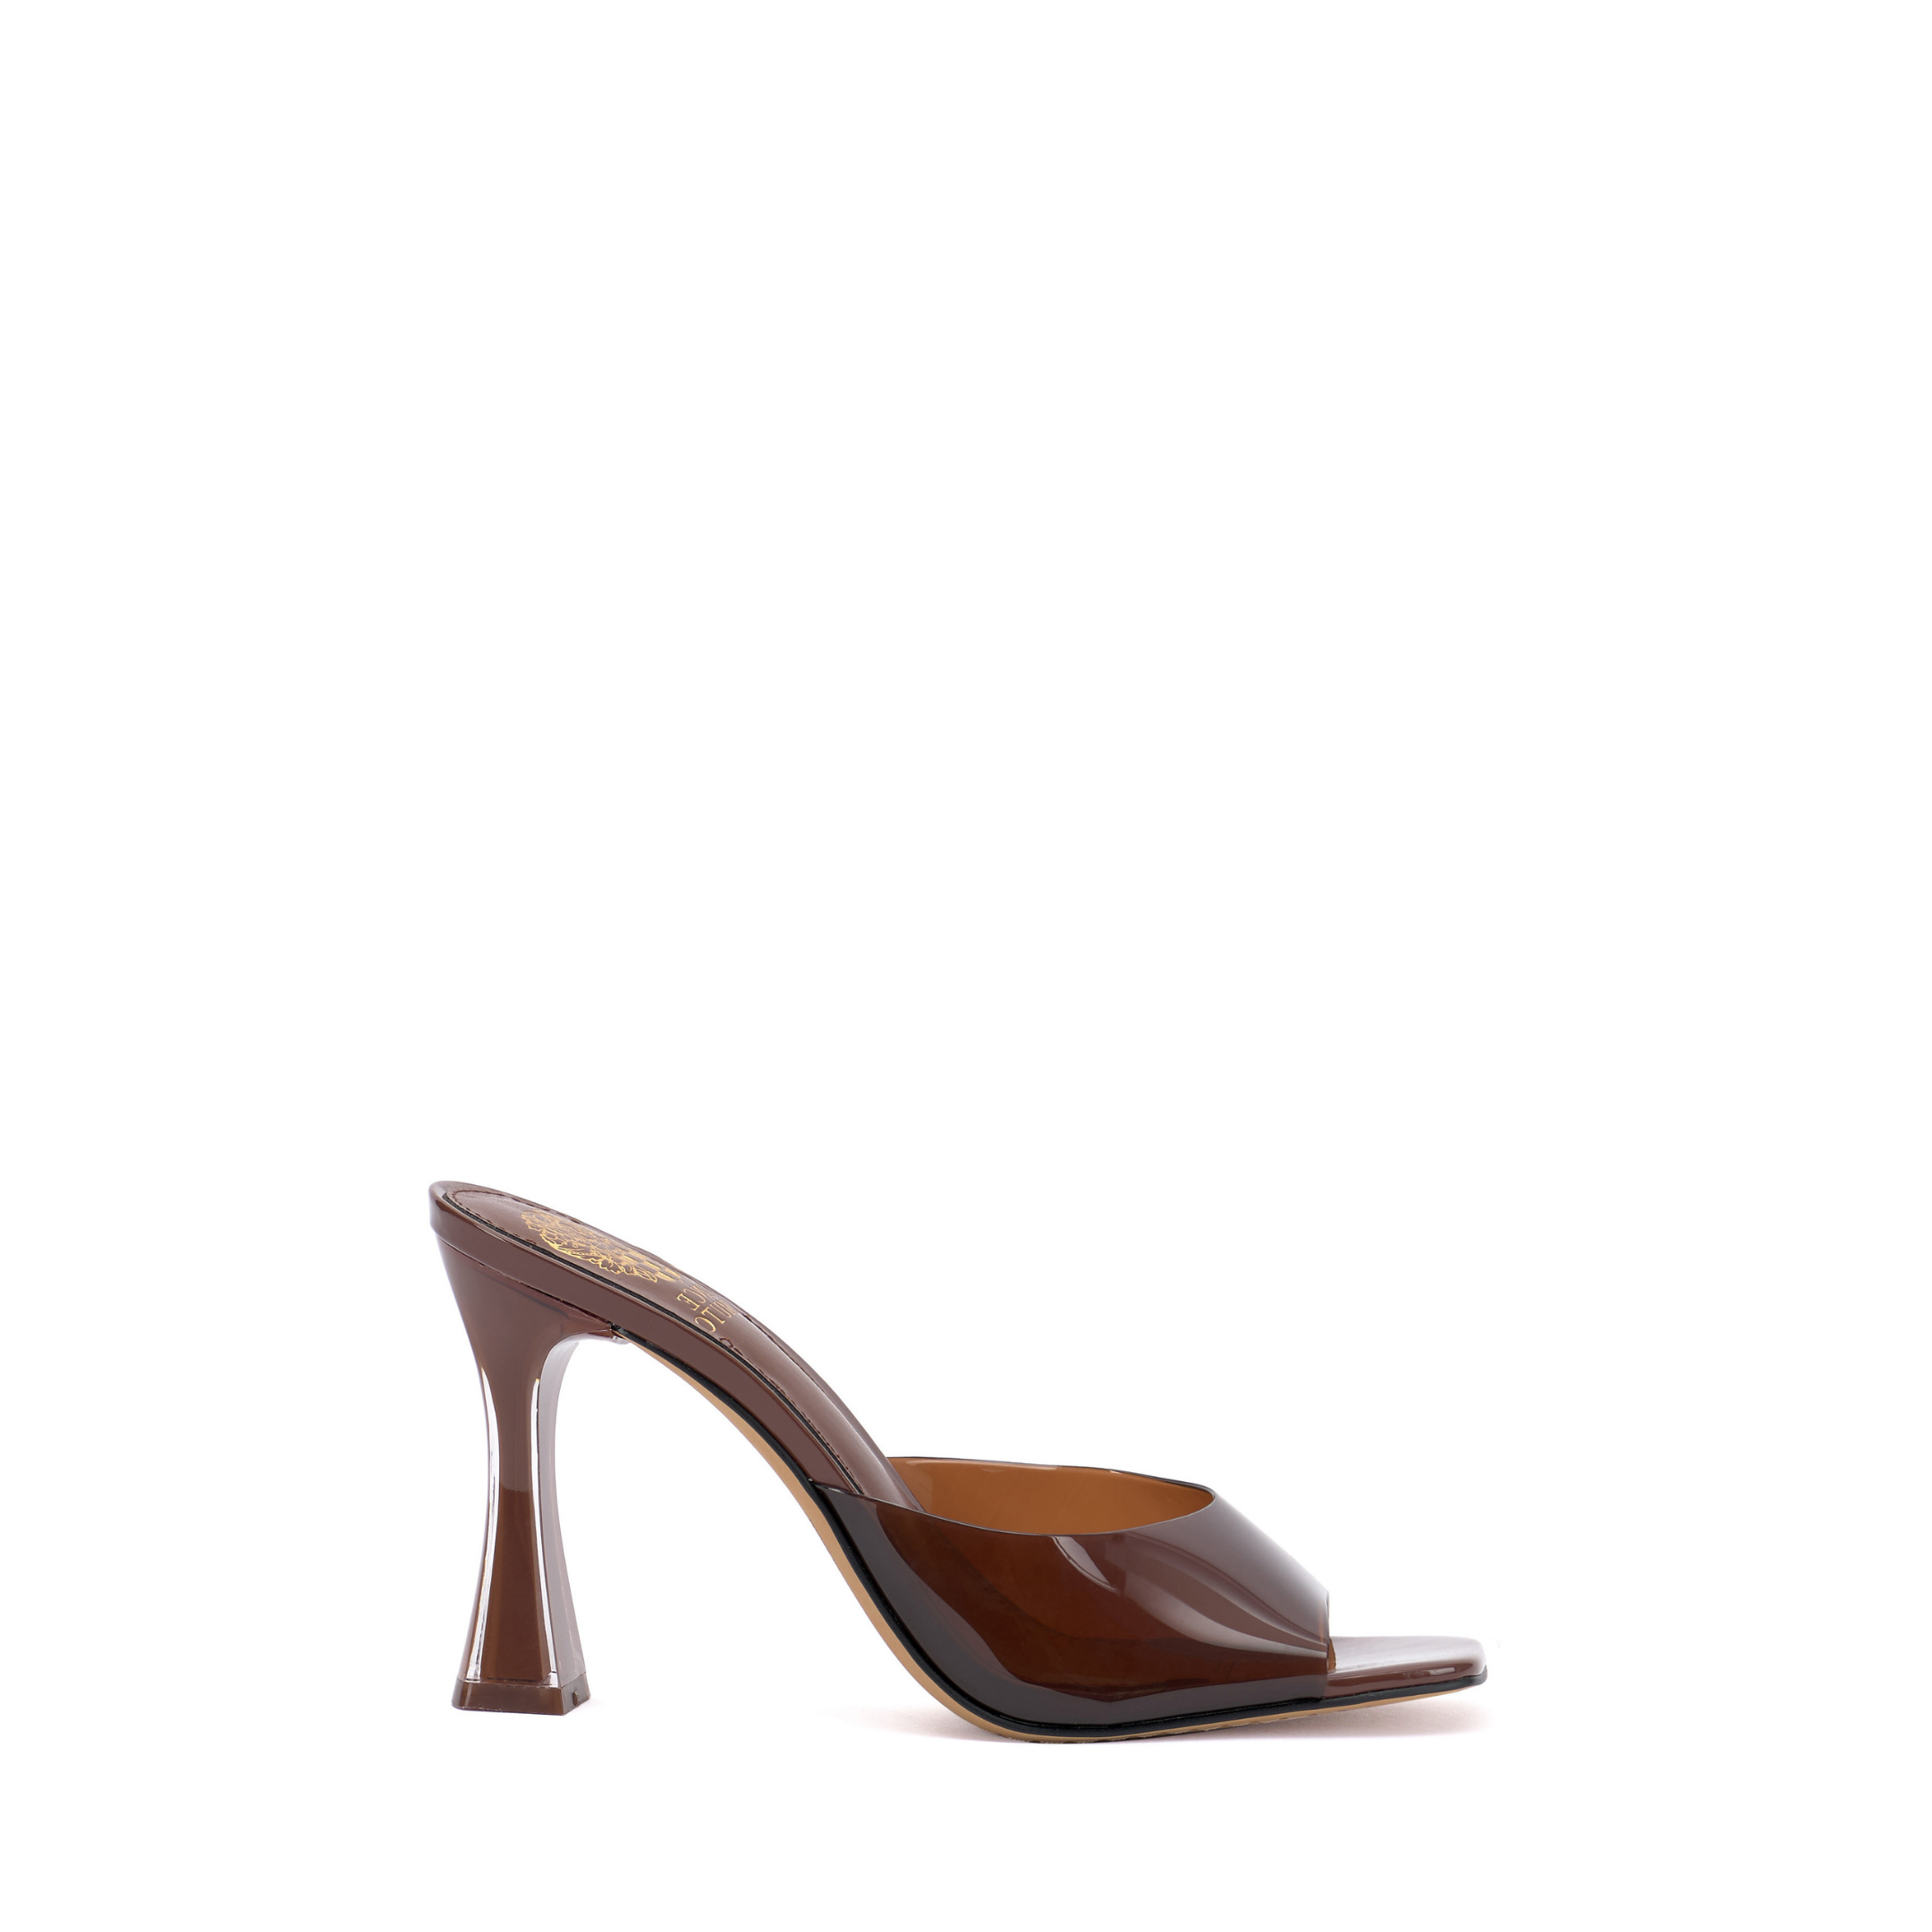 Vince Camuto's Sale Includes The Chicest Shoes And Accessories For ...